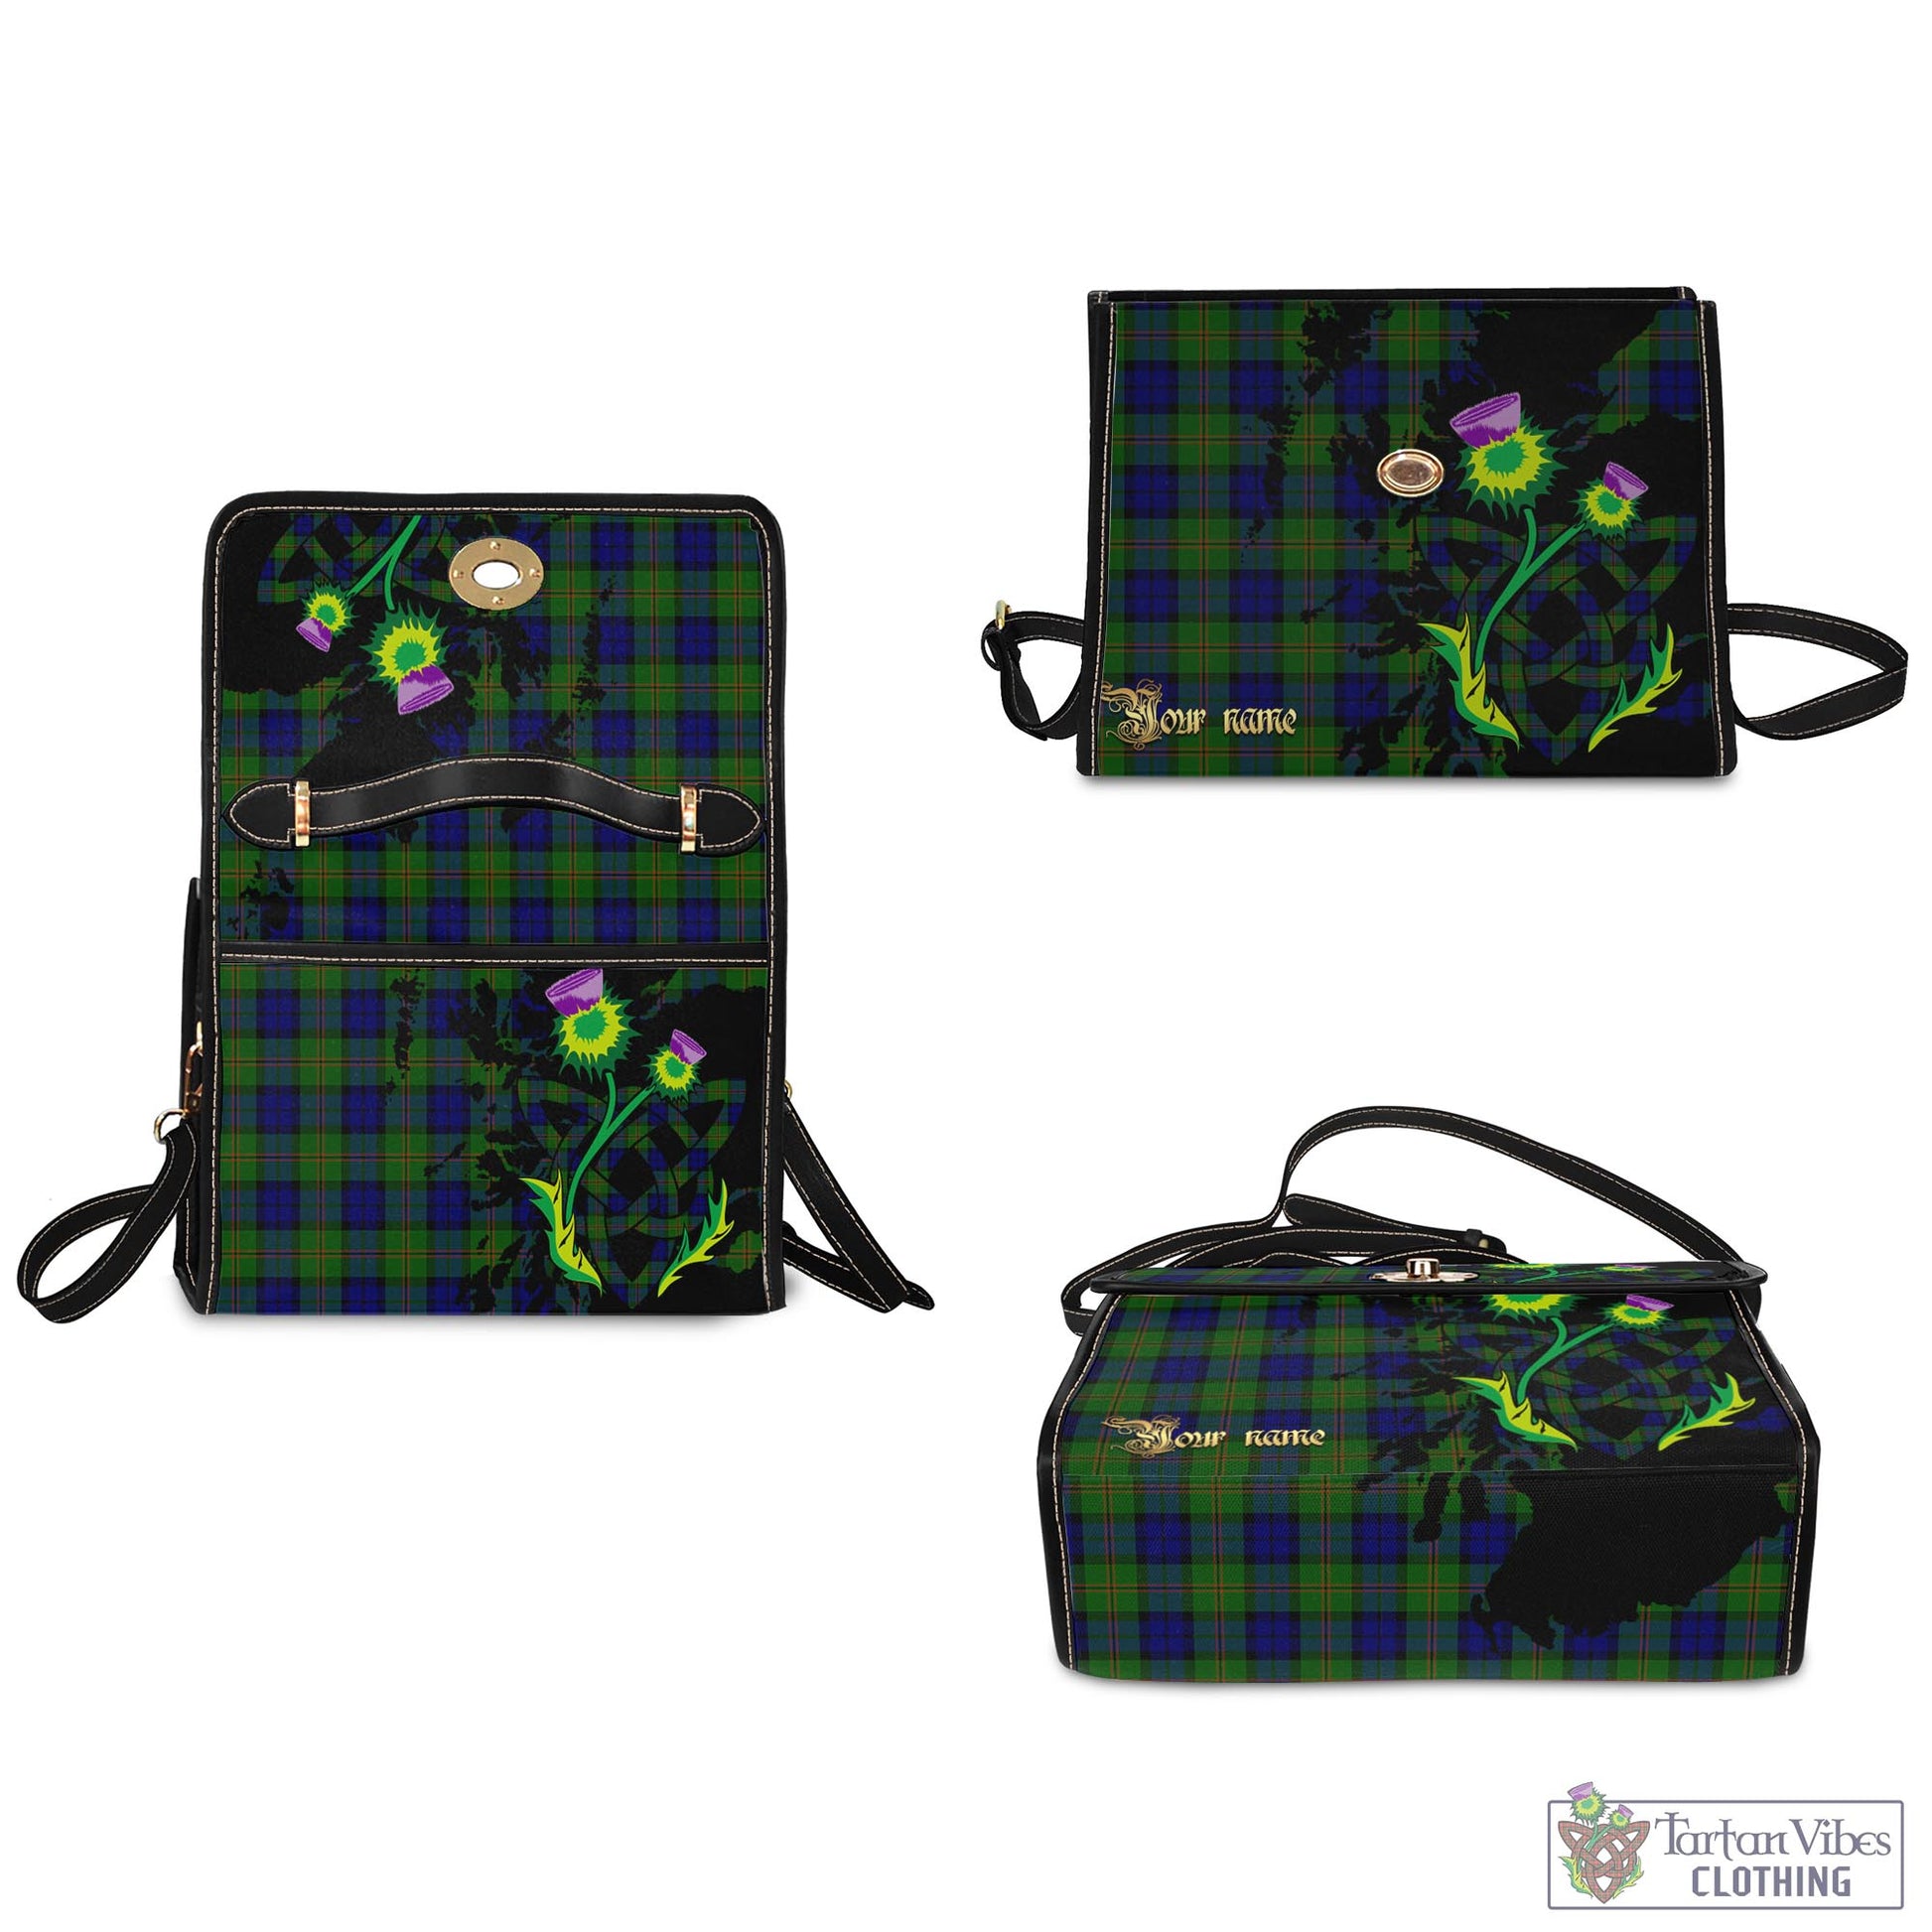 Tartan Vibes Clothing Dundas Modern Tartan Waterproof Canvas Bag with Scotland Map and Thistle Celtic Accents